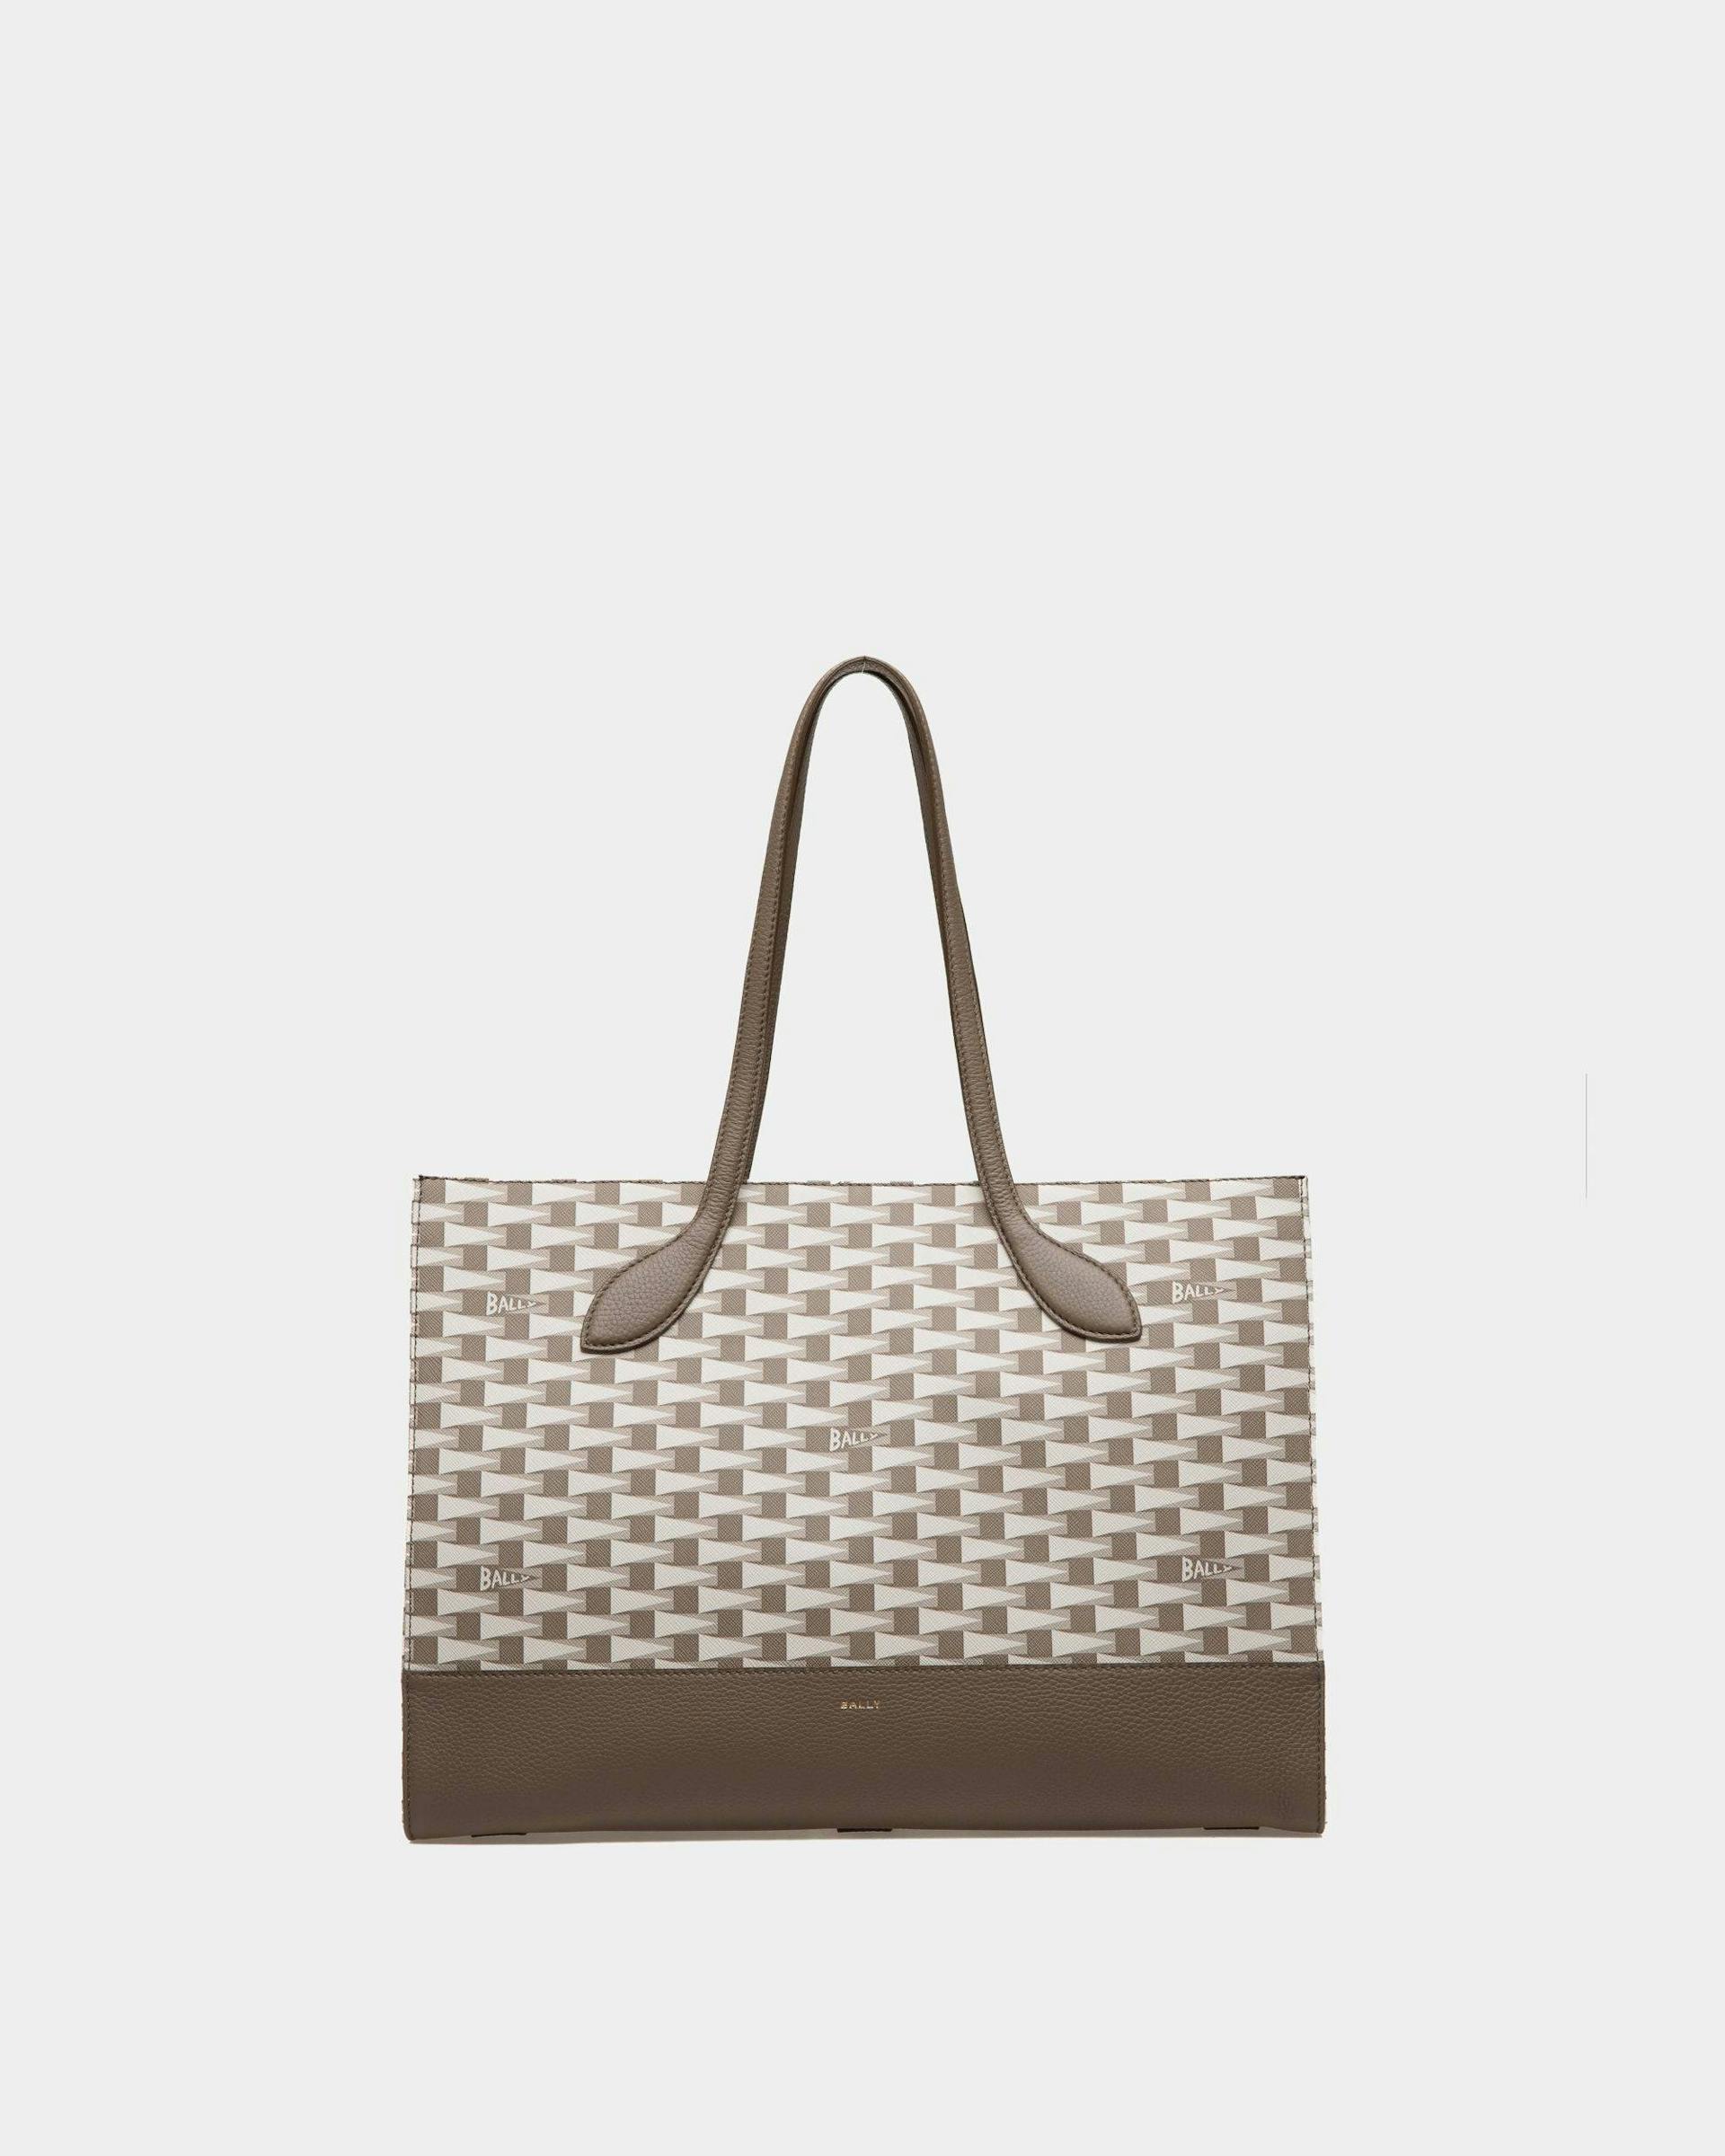 Women's Pennant Tote Bag in TPU | Bally | Still Life Front